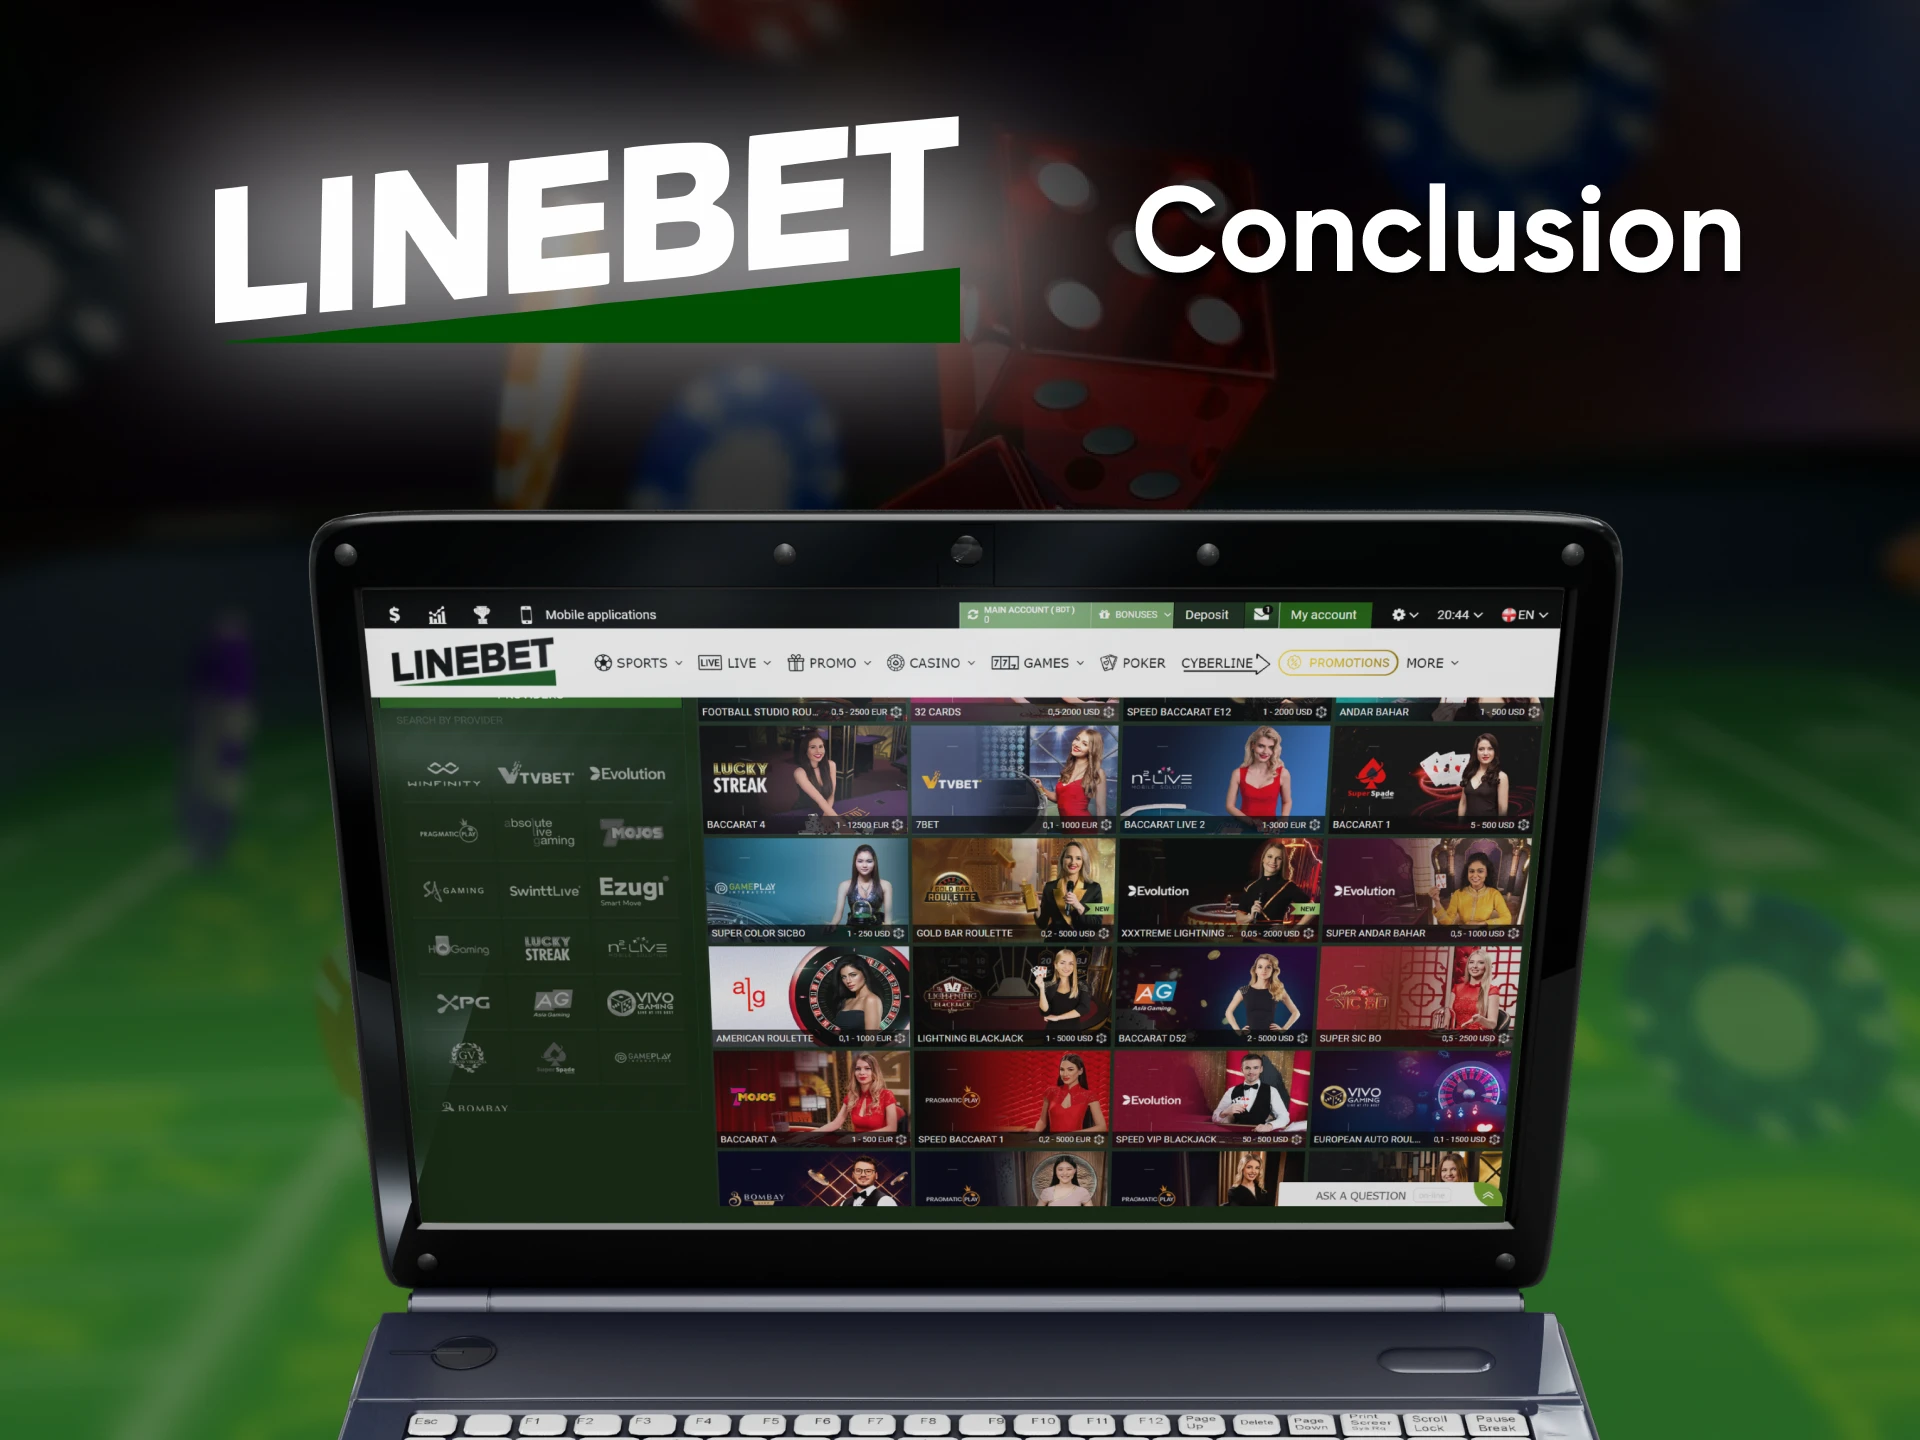 Linebet is a quality service for casino games.